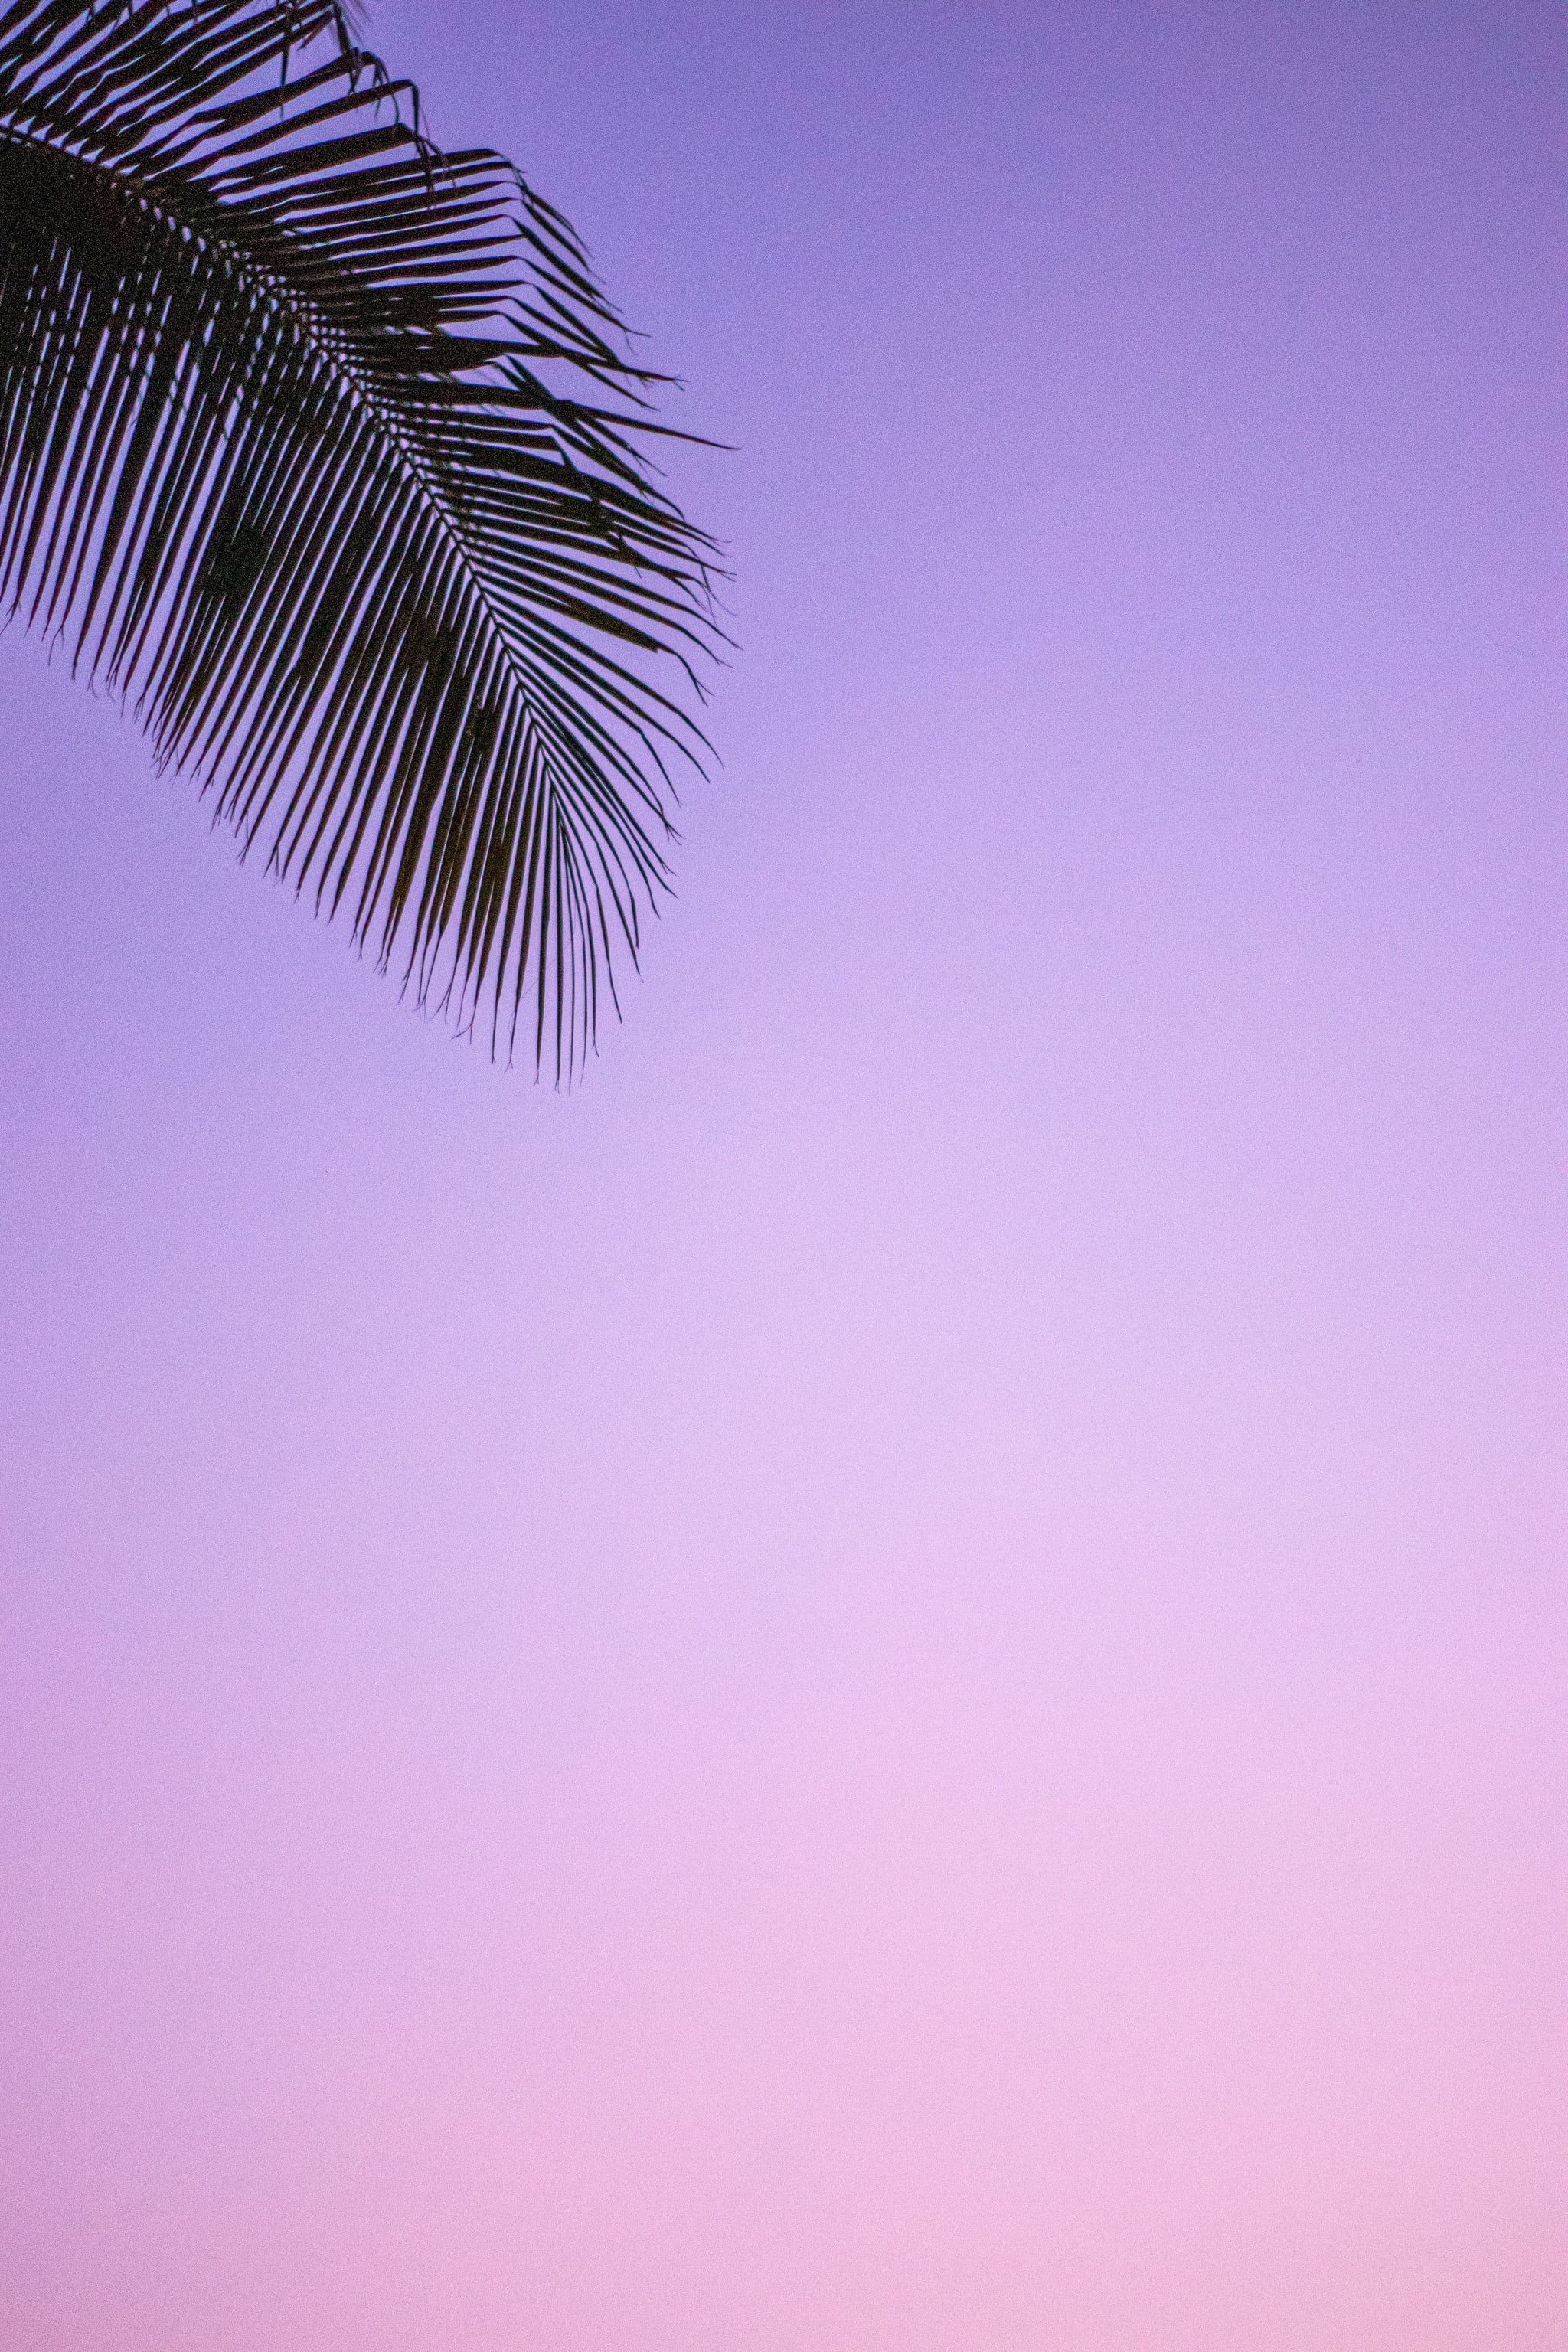 Tropical iPhone Wallpaper. The Best Wallpaper Ideas That'll Make Your Phone Look Aesthetically Pleasing AF